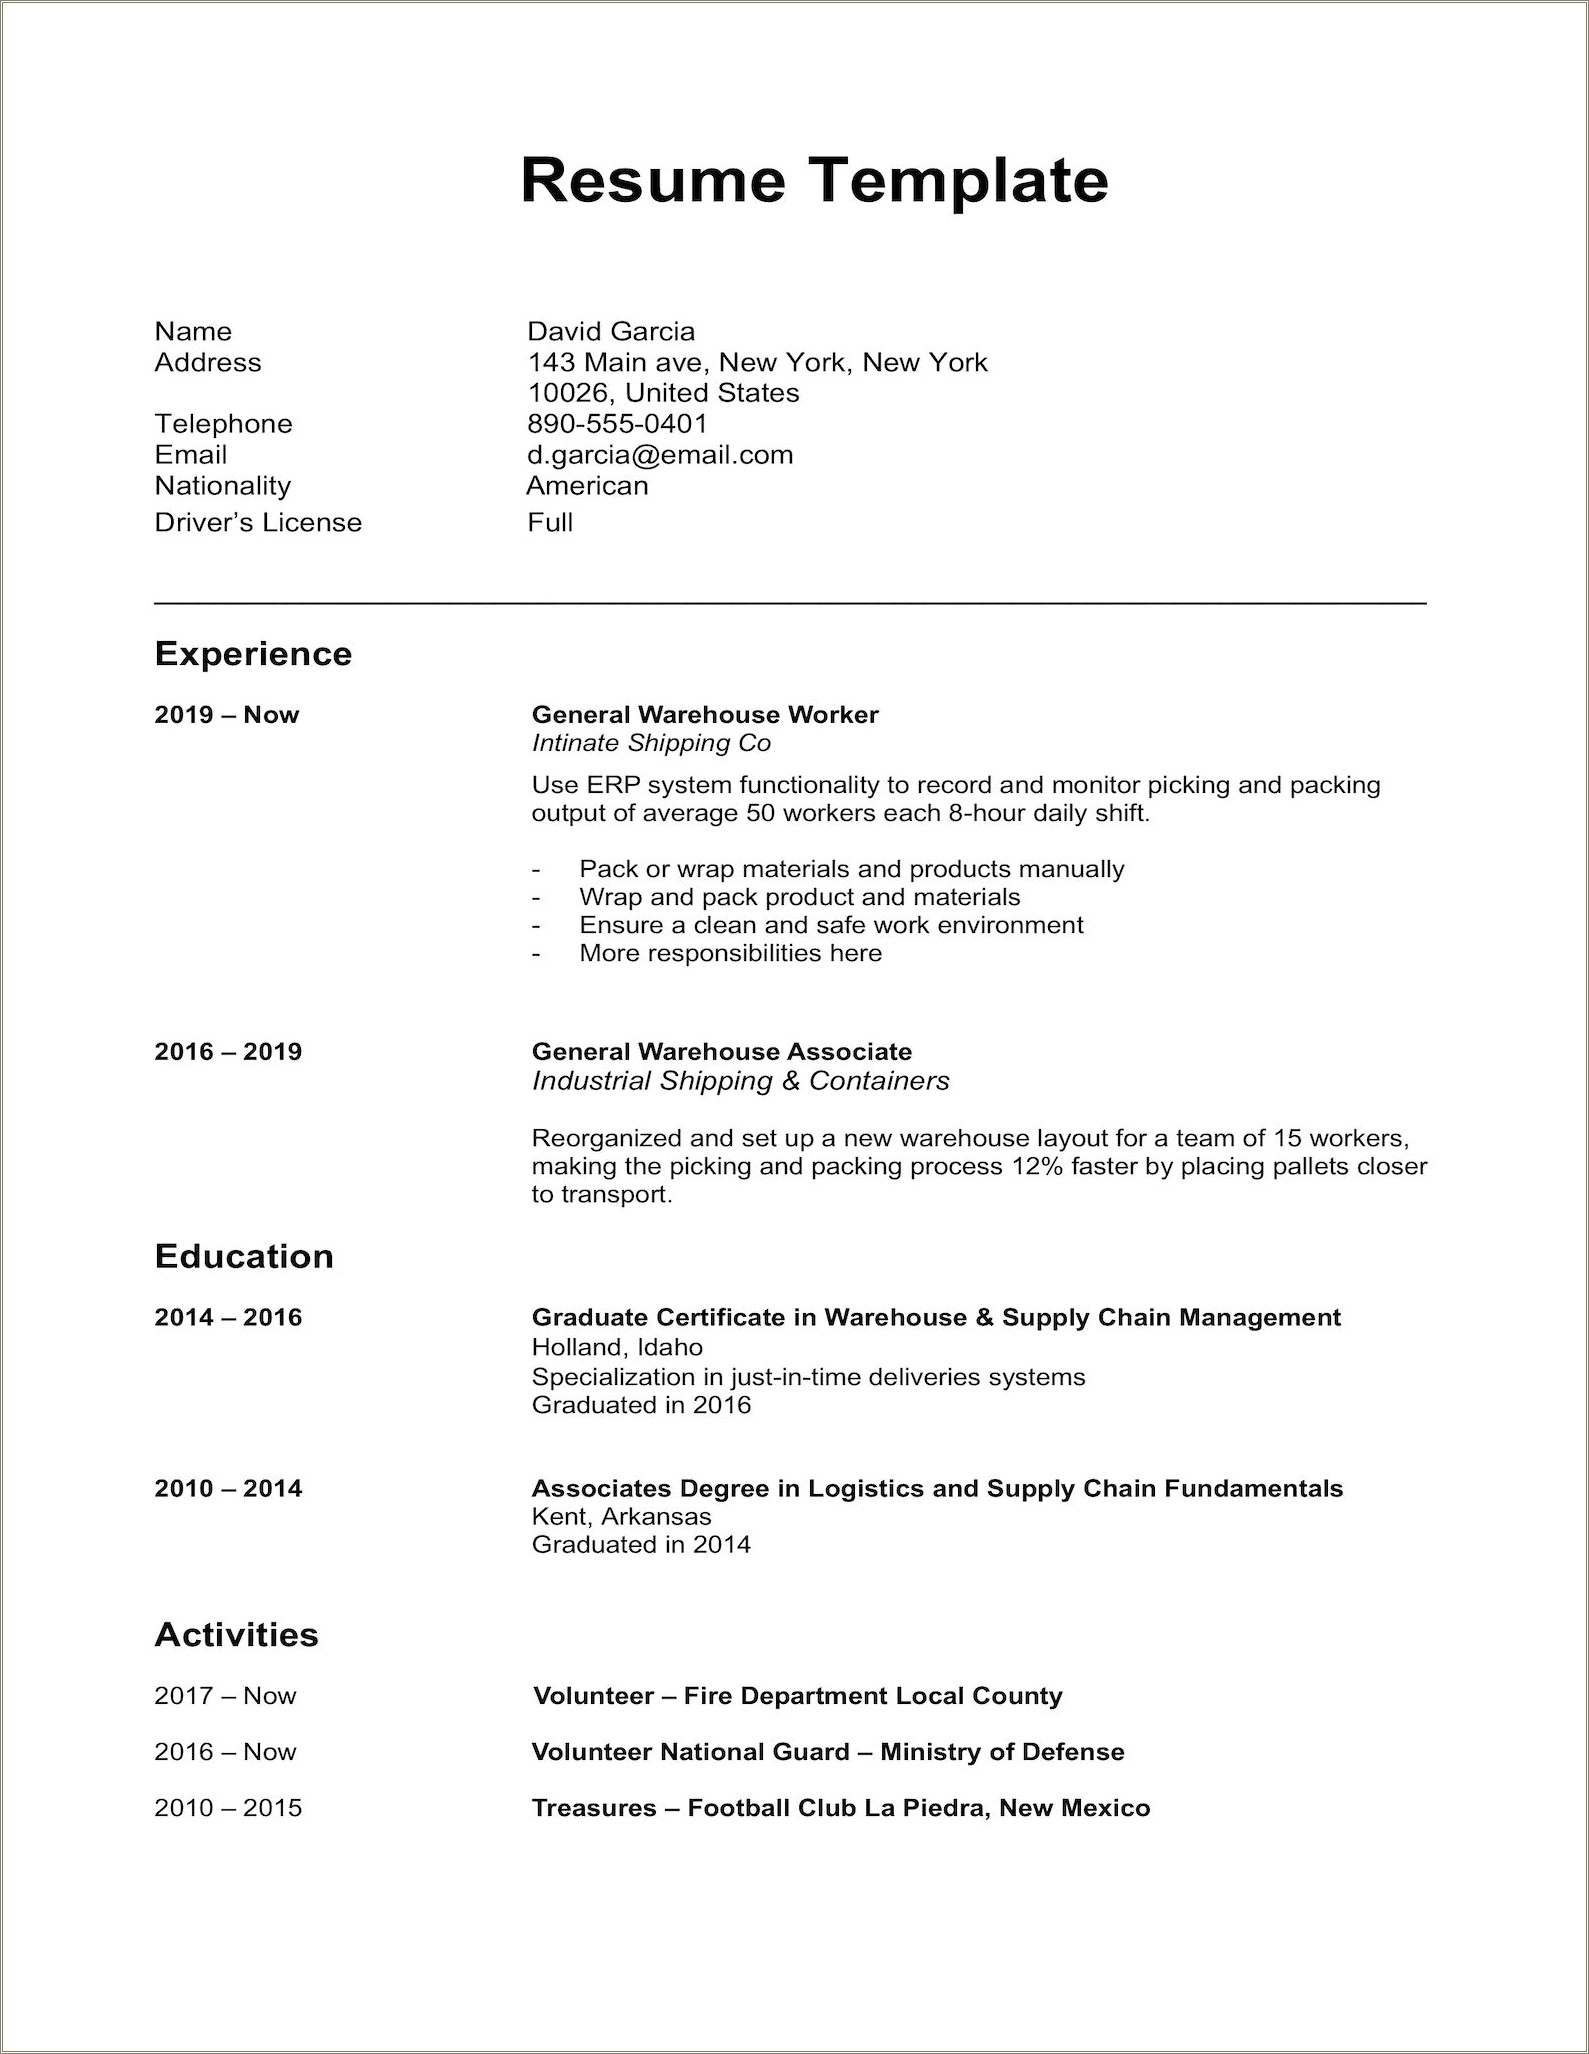 Professional Experience Resume Format In Word